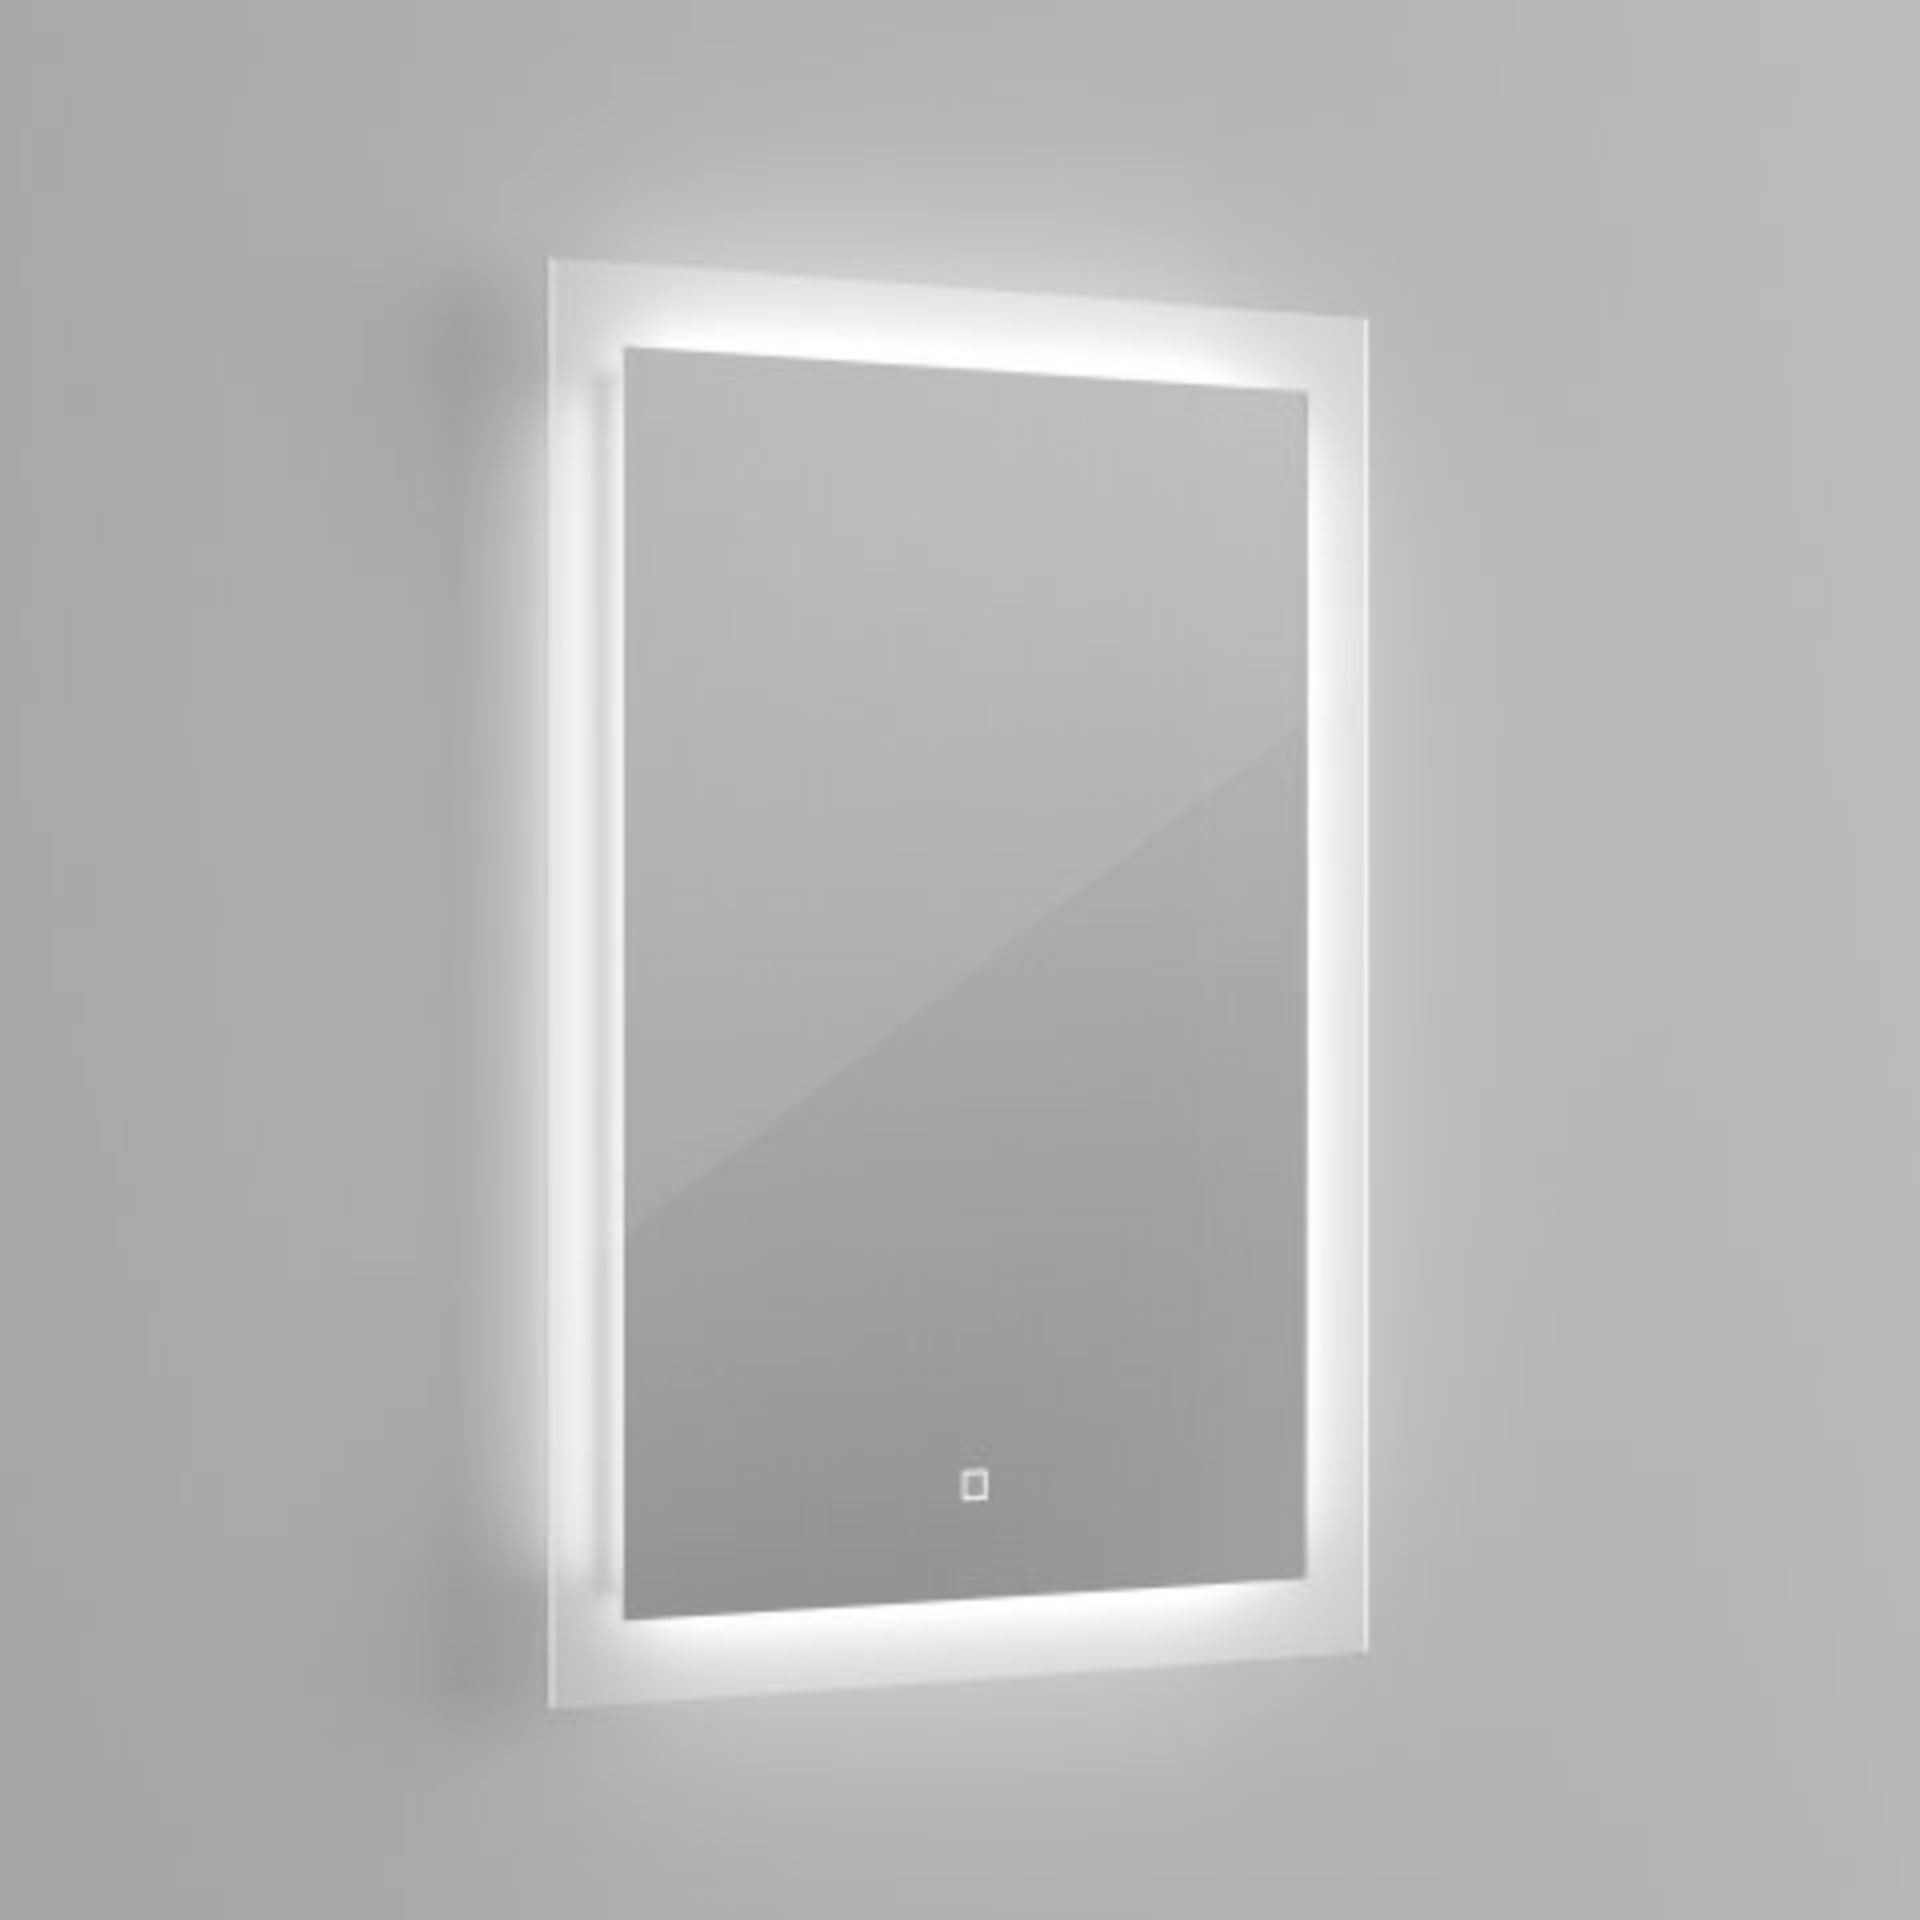 (138) 700x500mm Orion Illuminated LED Mirror - Switch Control. RRP £349.99. Light up your bathroom - Image 2 of 3